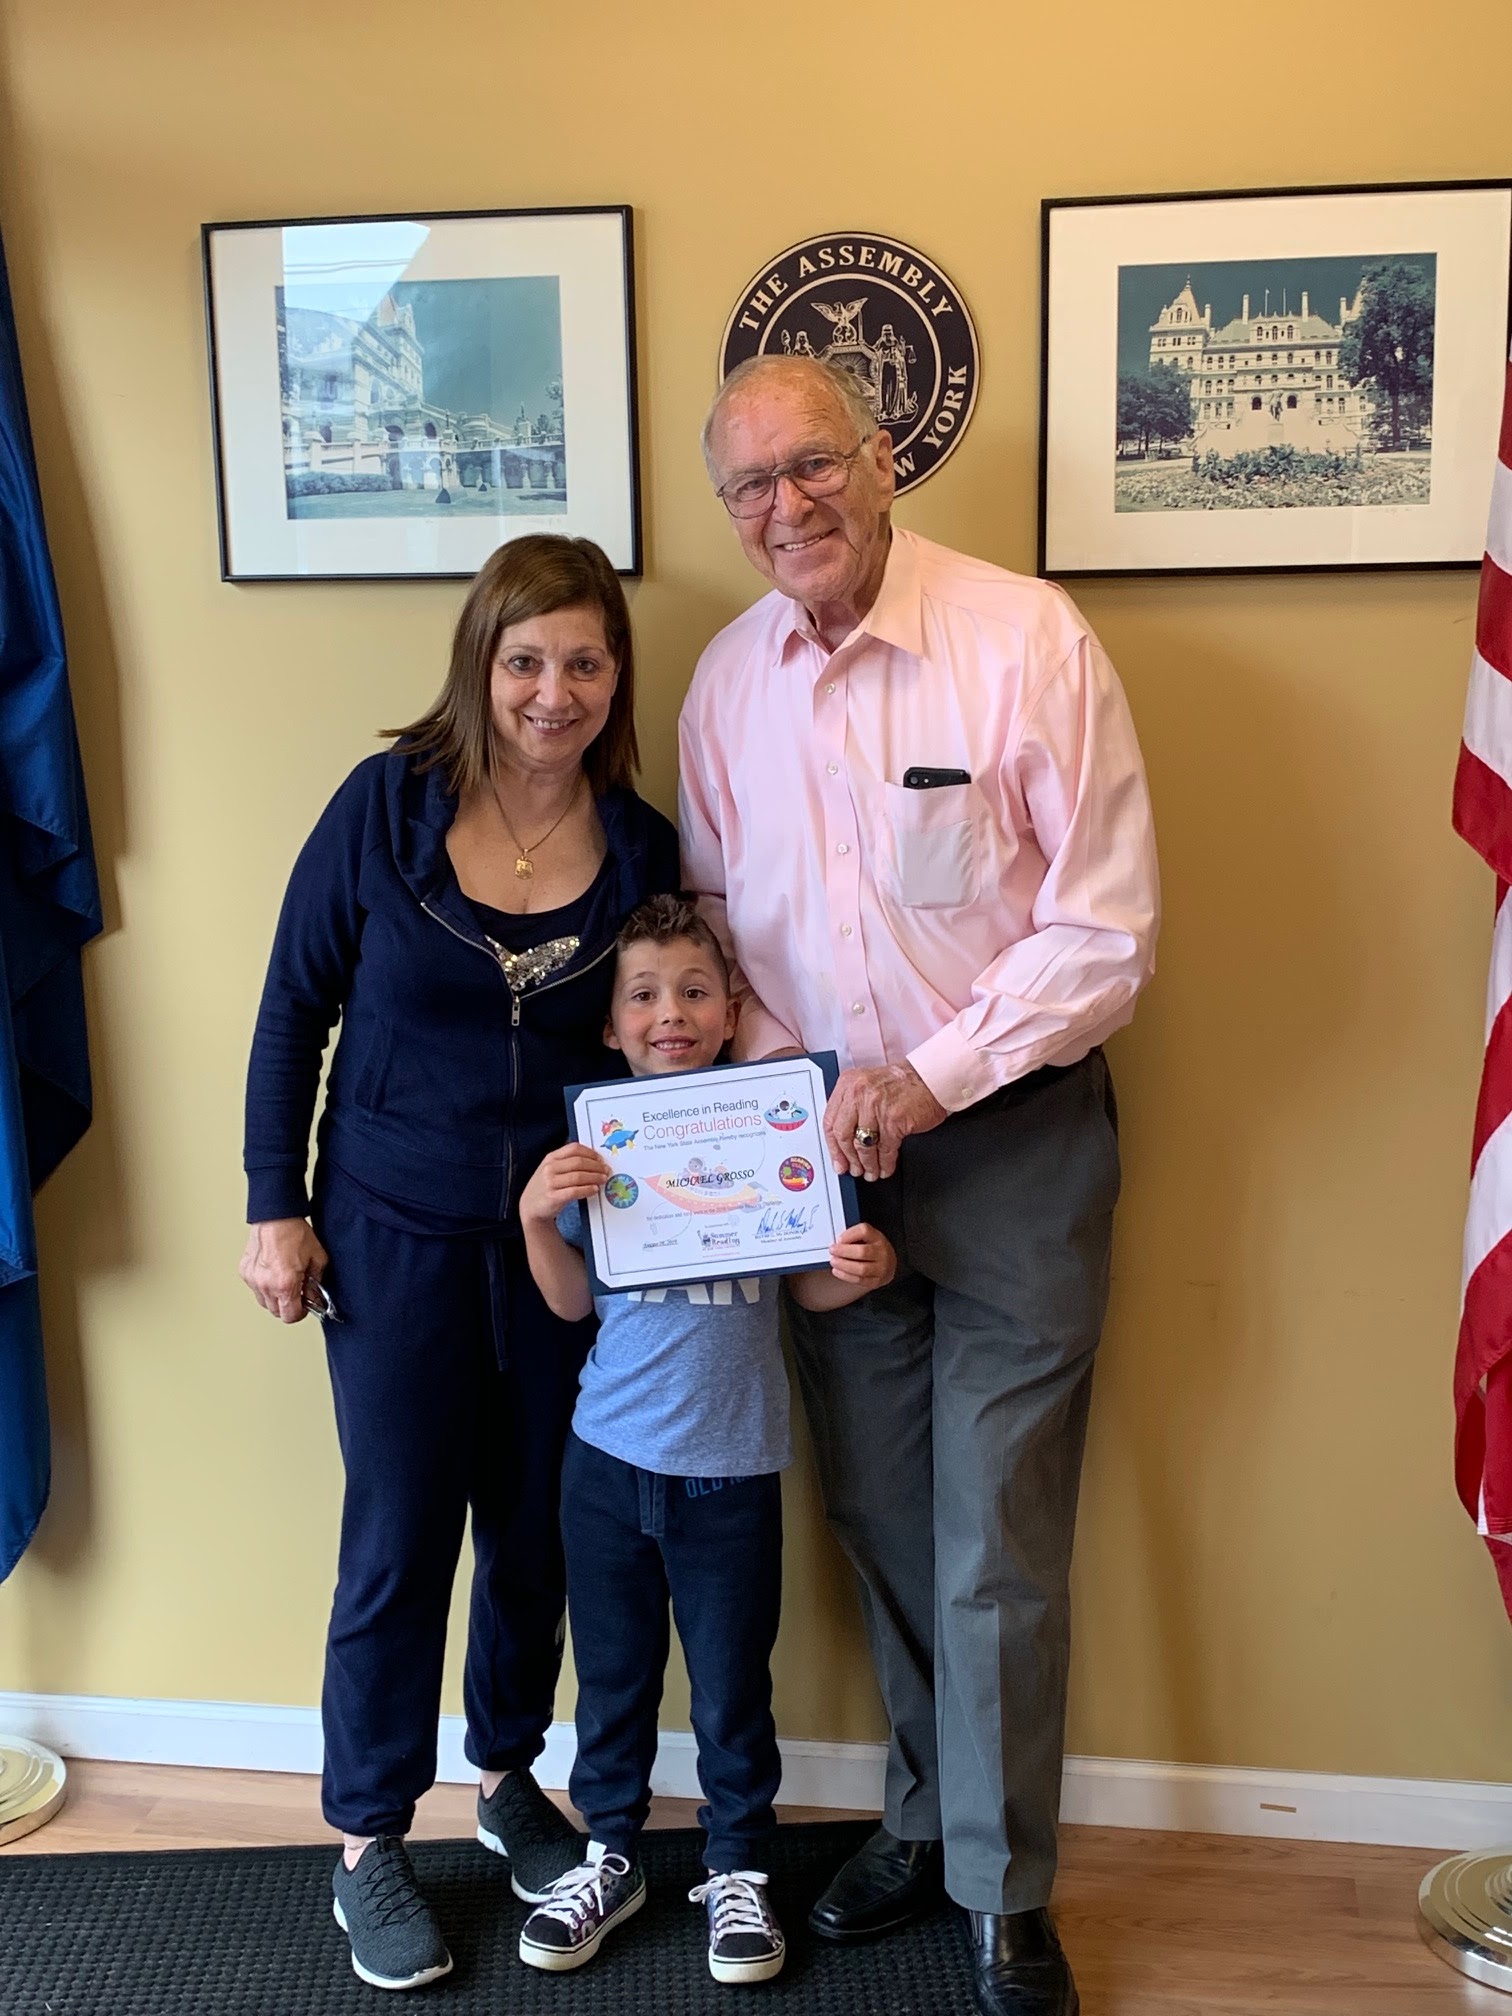 Assemblyman Dave McDonough (R,C,I-Merrick) pictured with Michael Grosso [center] and his Grandmother Angela Curro [left] with Michael’s Summer Reading certificate.